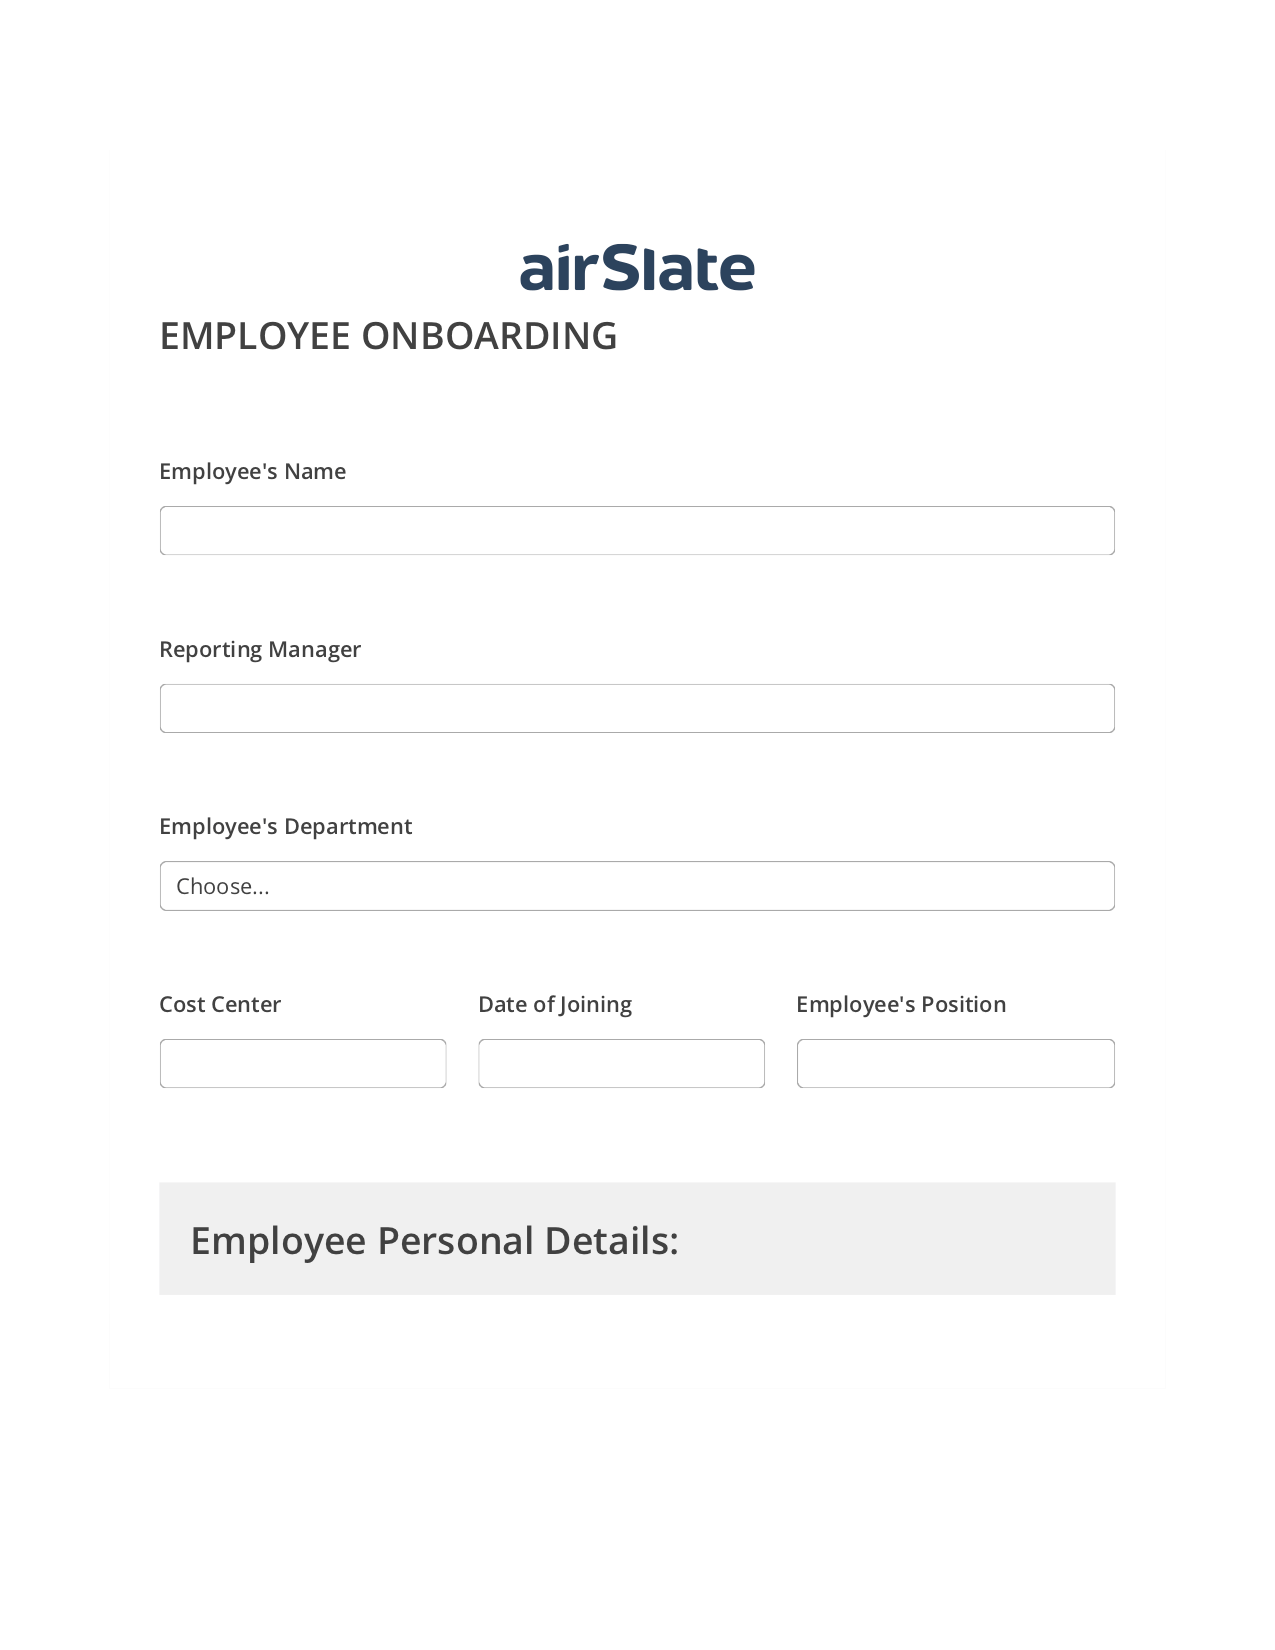 Employee Onboarding Workflow Pre-fill Slate from MS Dynamics 365 record, Google Cloud Print Bot, Post-finish Document Bot